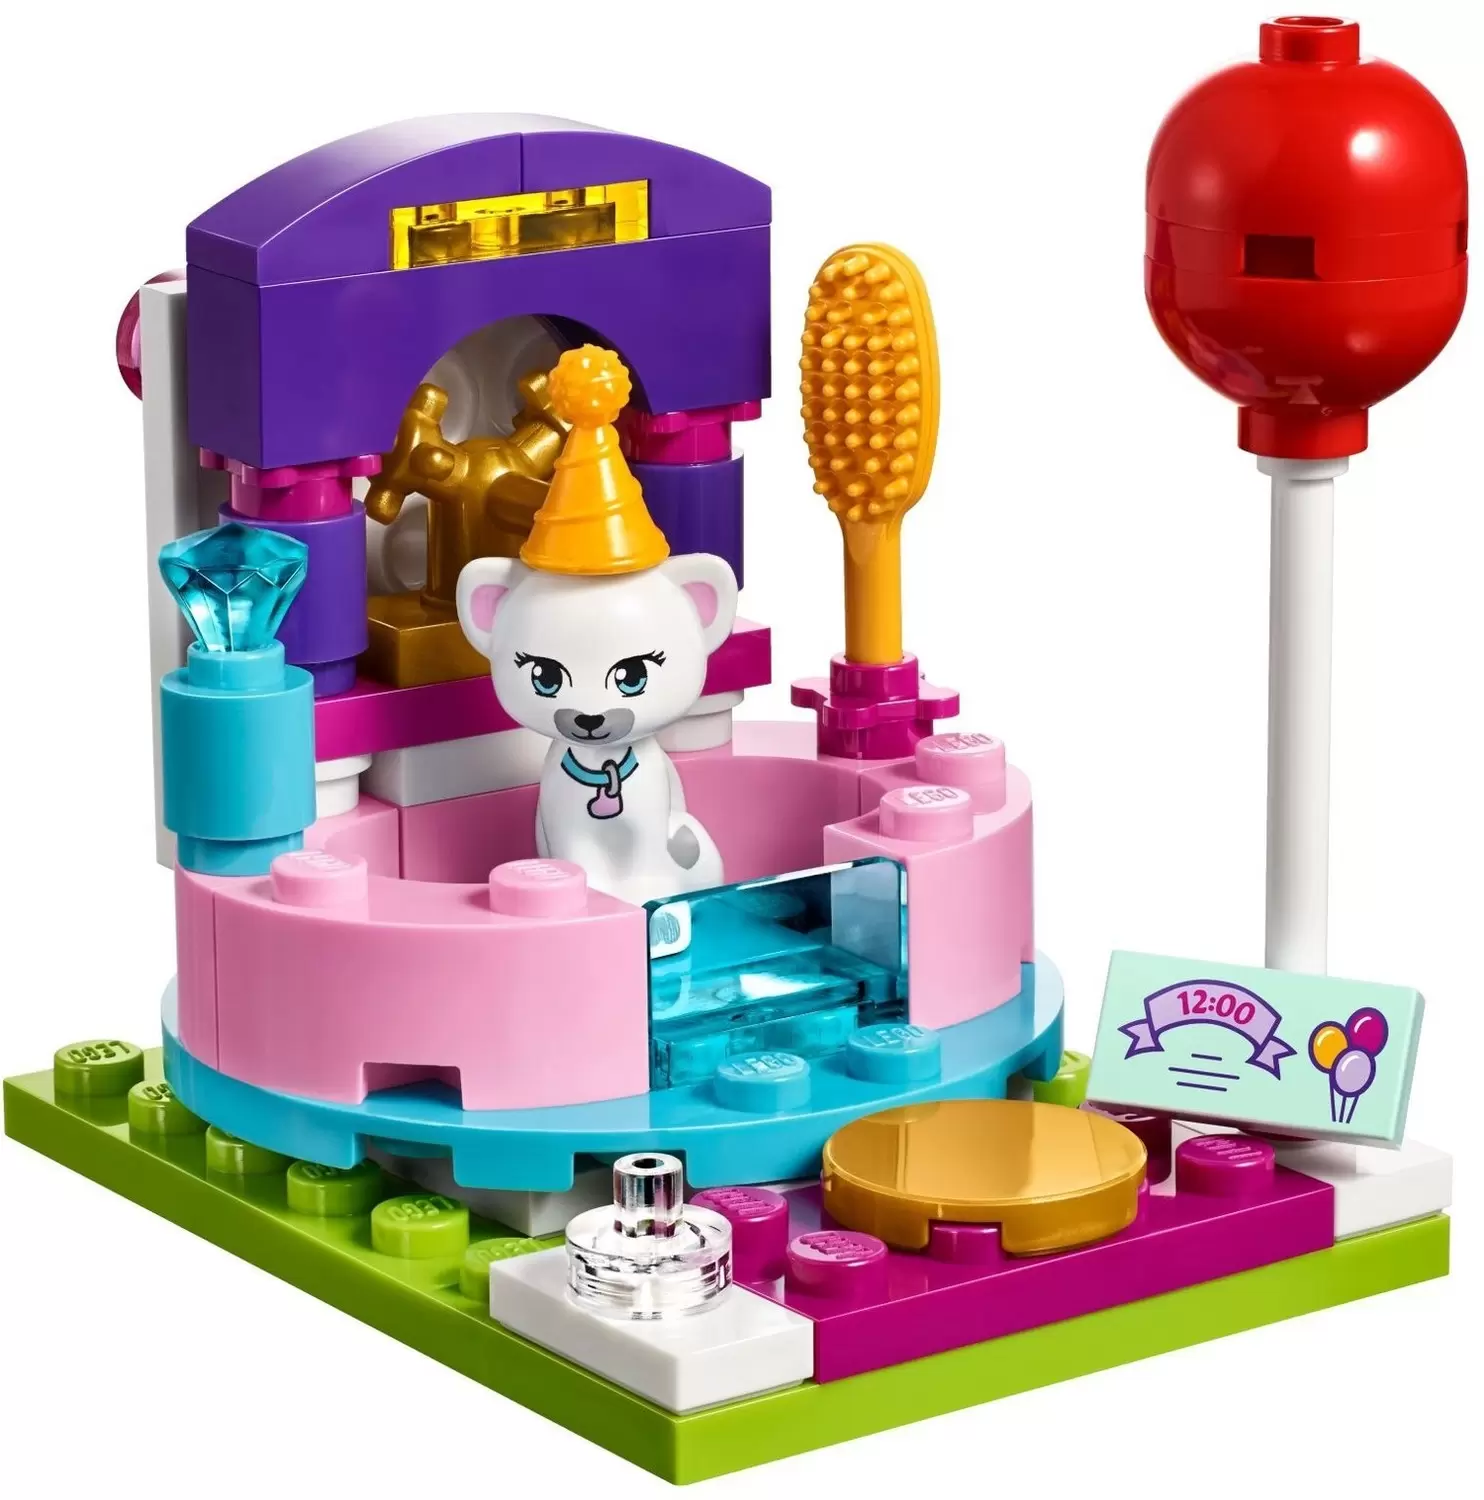 LEGO Friends - Party Styling